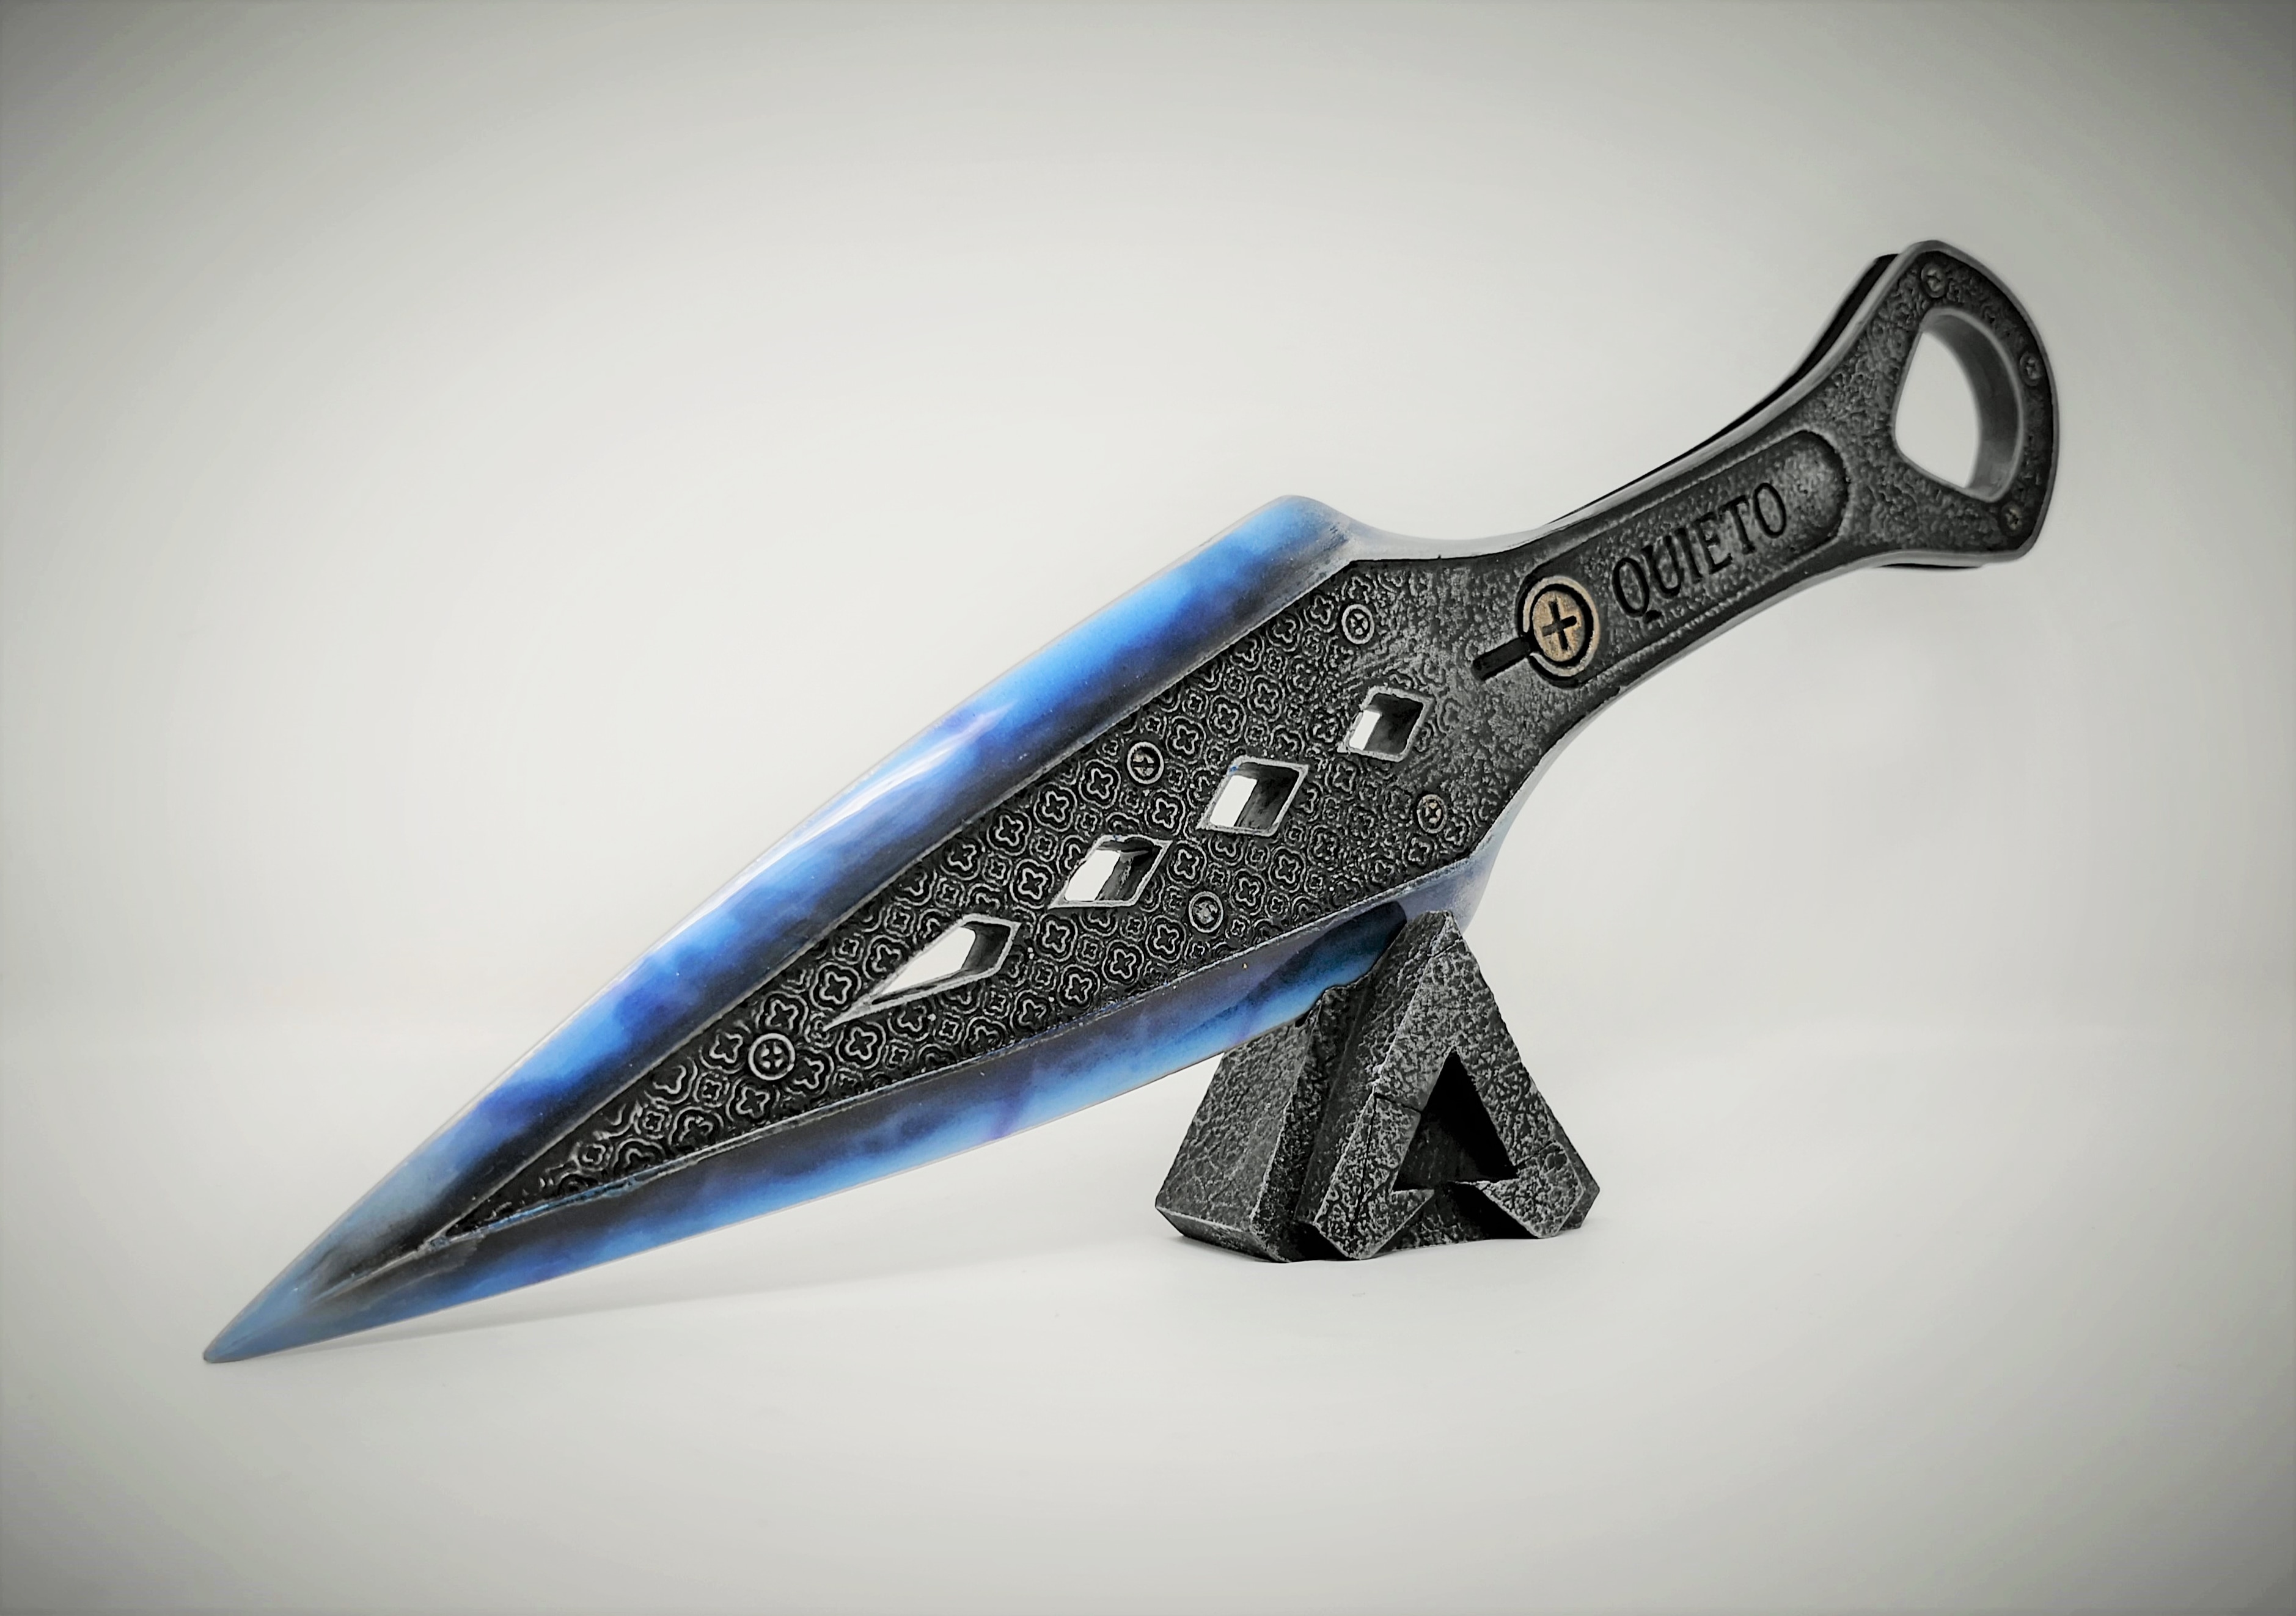 The heirloom knife from Apex Legends. 